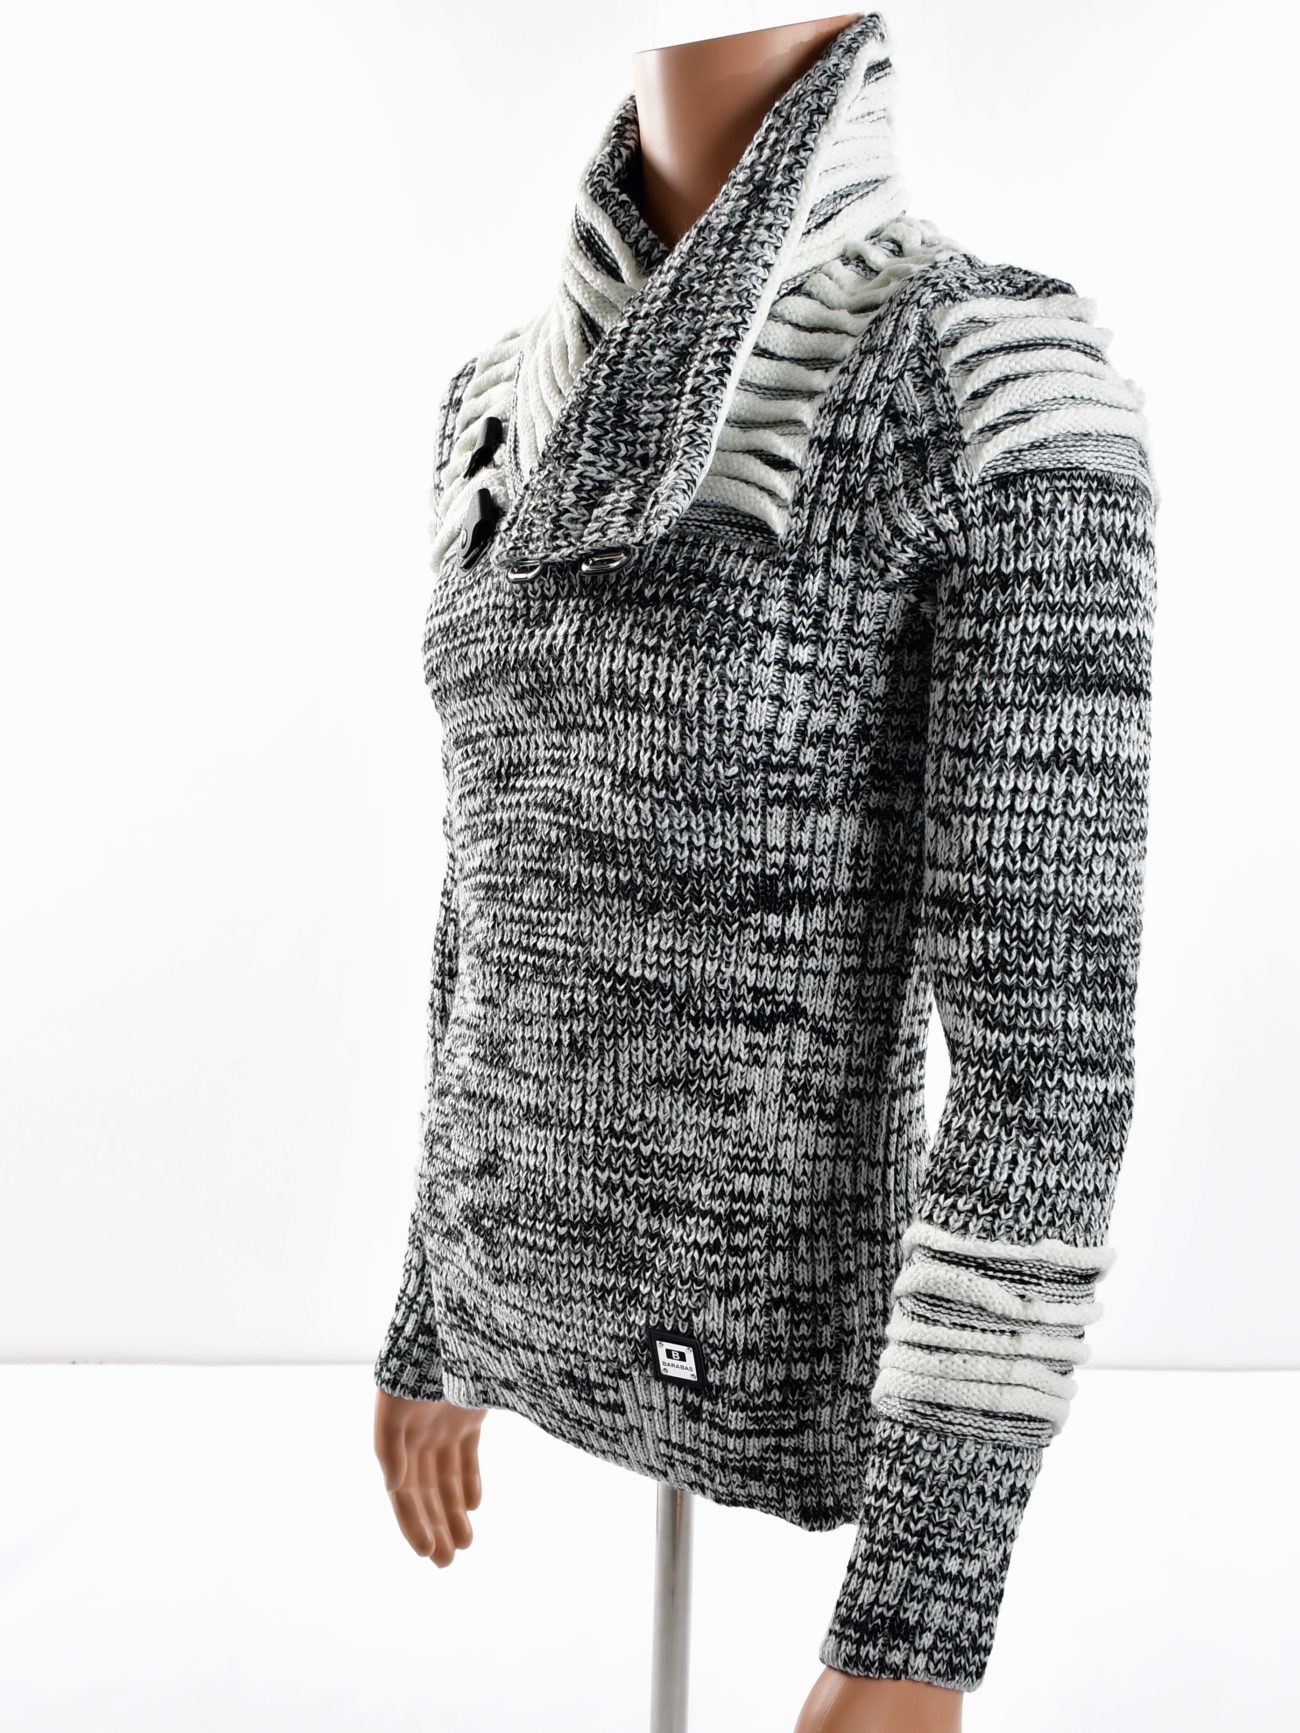 RIBBED LEATHER BUCKLED SHAWL COLLAR SWEATER | EPIC VIBEZ